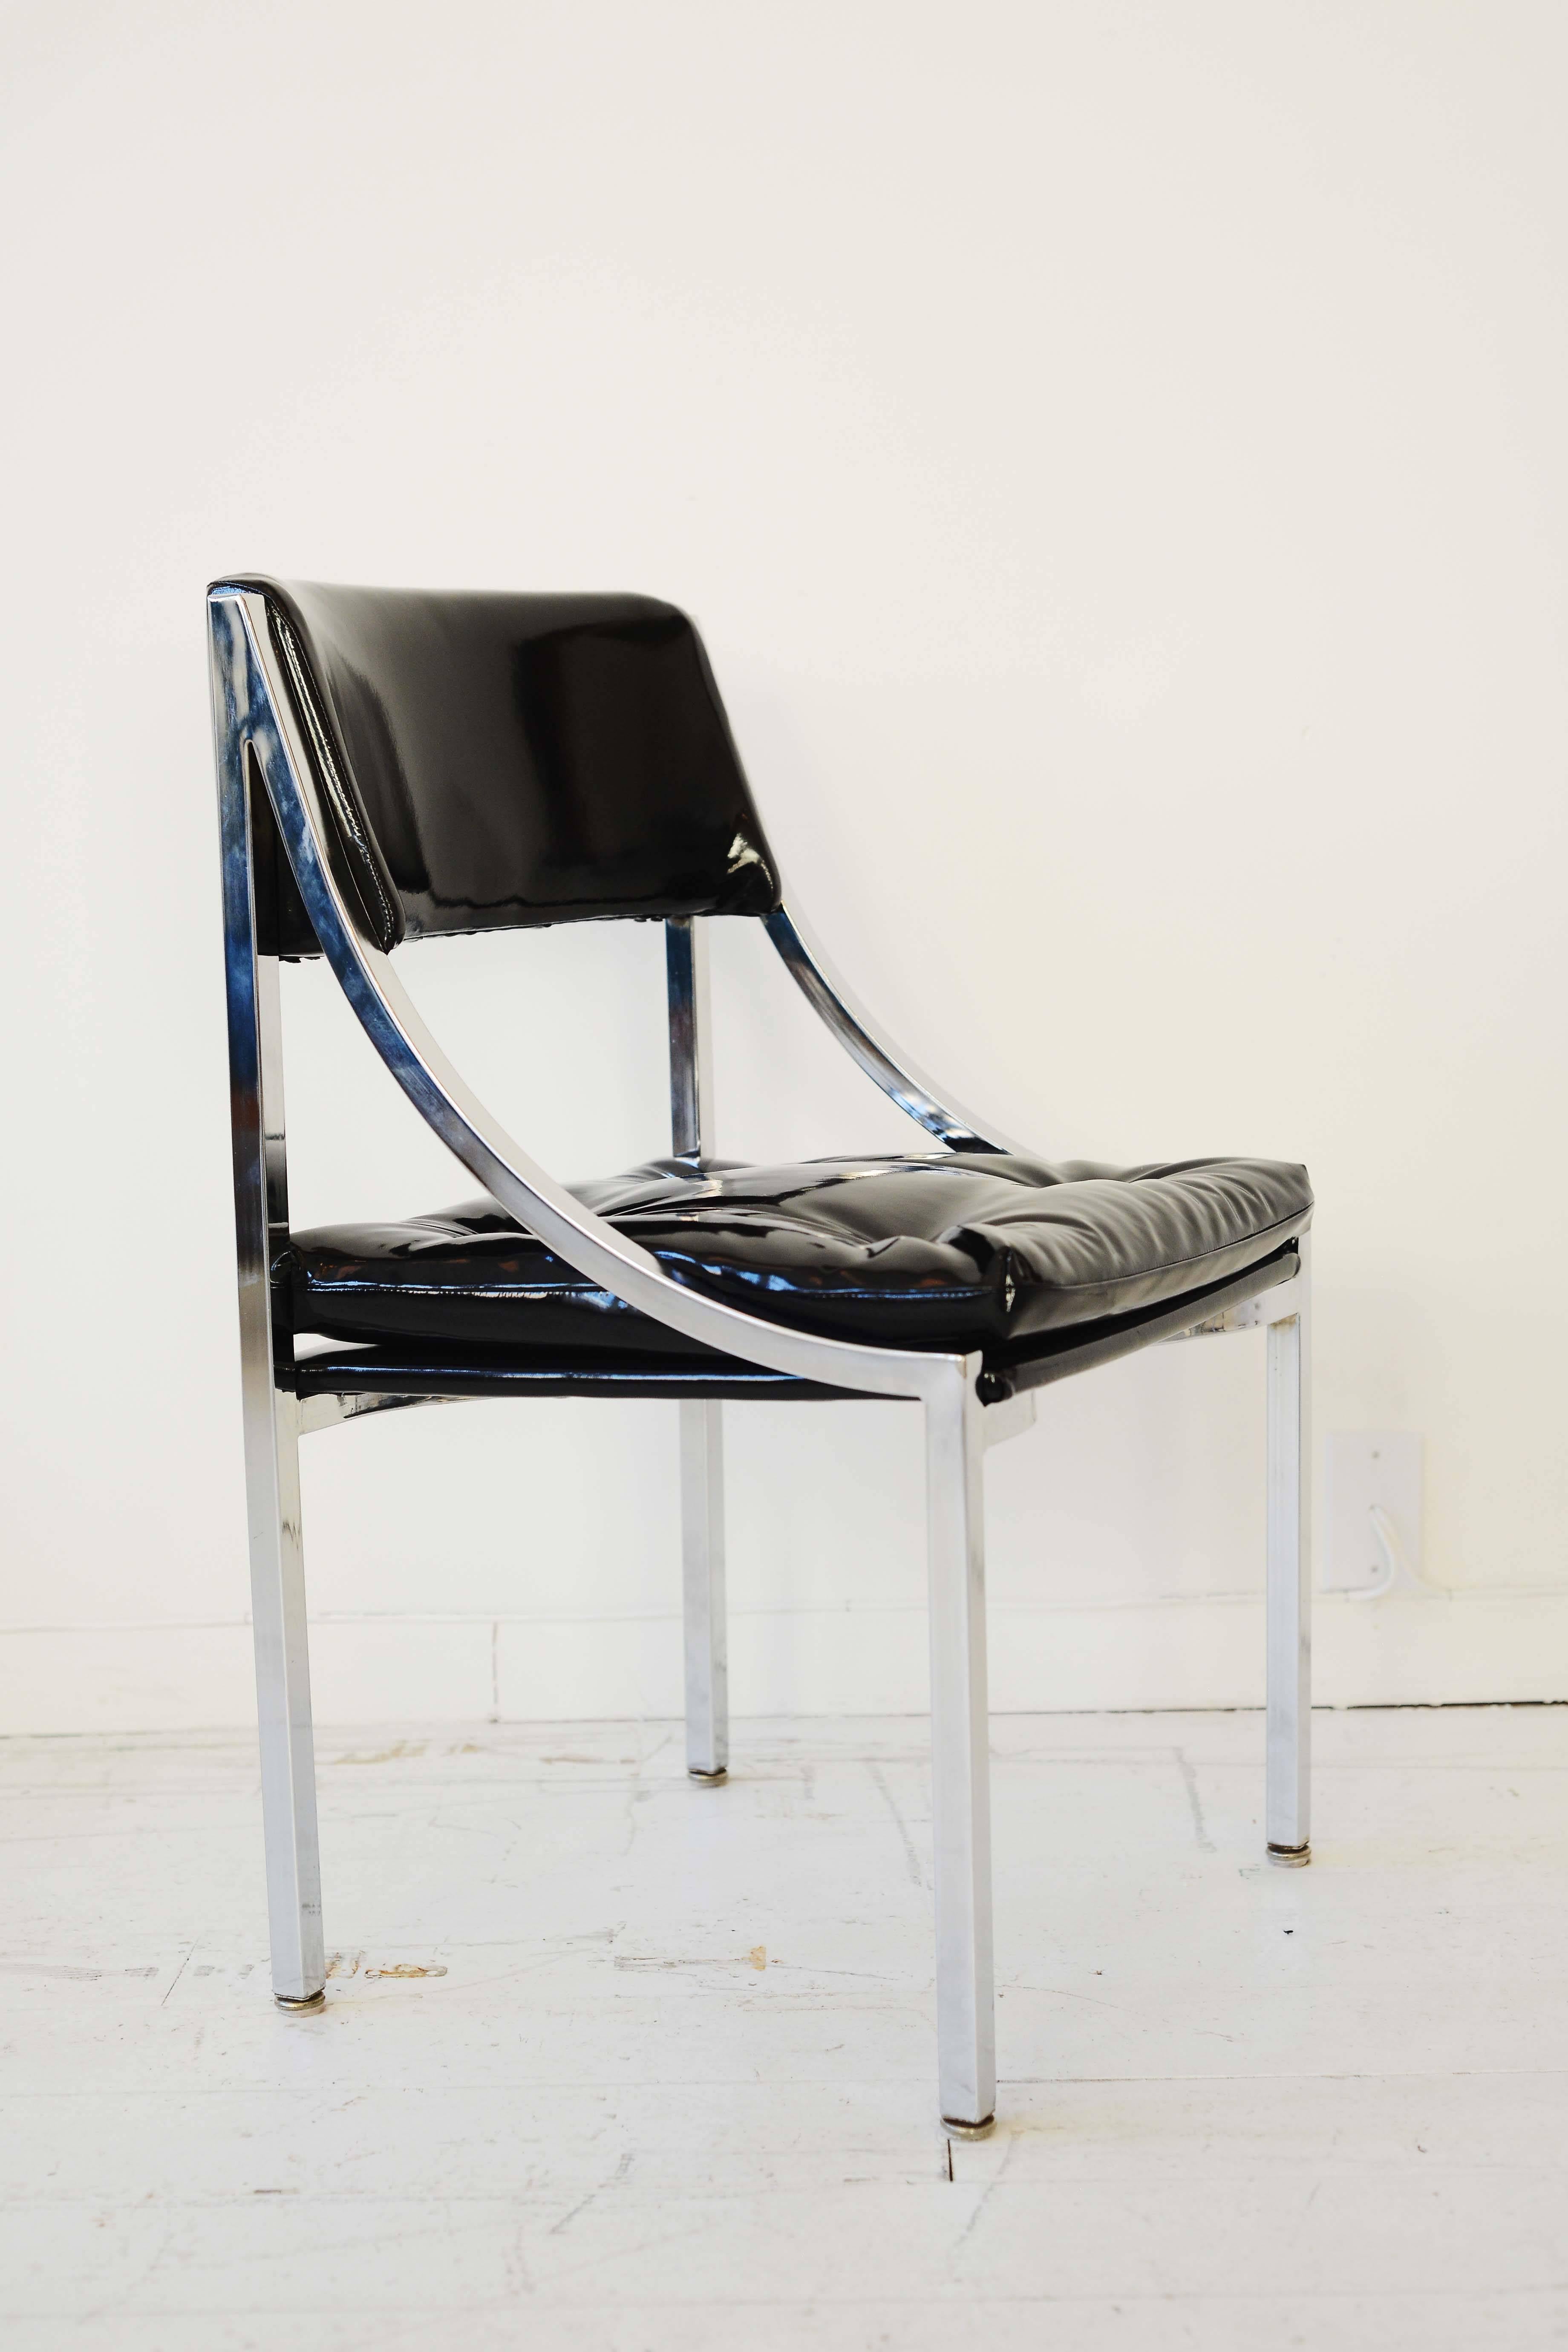 Patent Leather Set of Six Mid-Century Polished Chrome Chairs. Covered in black patent leather For Sale